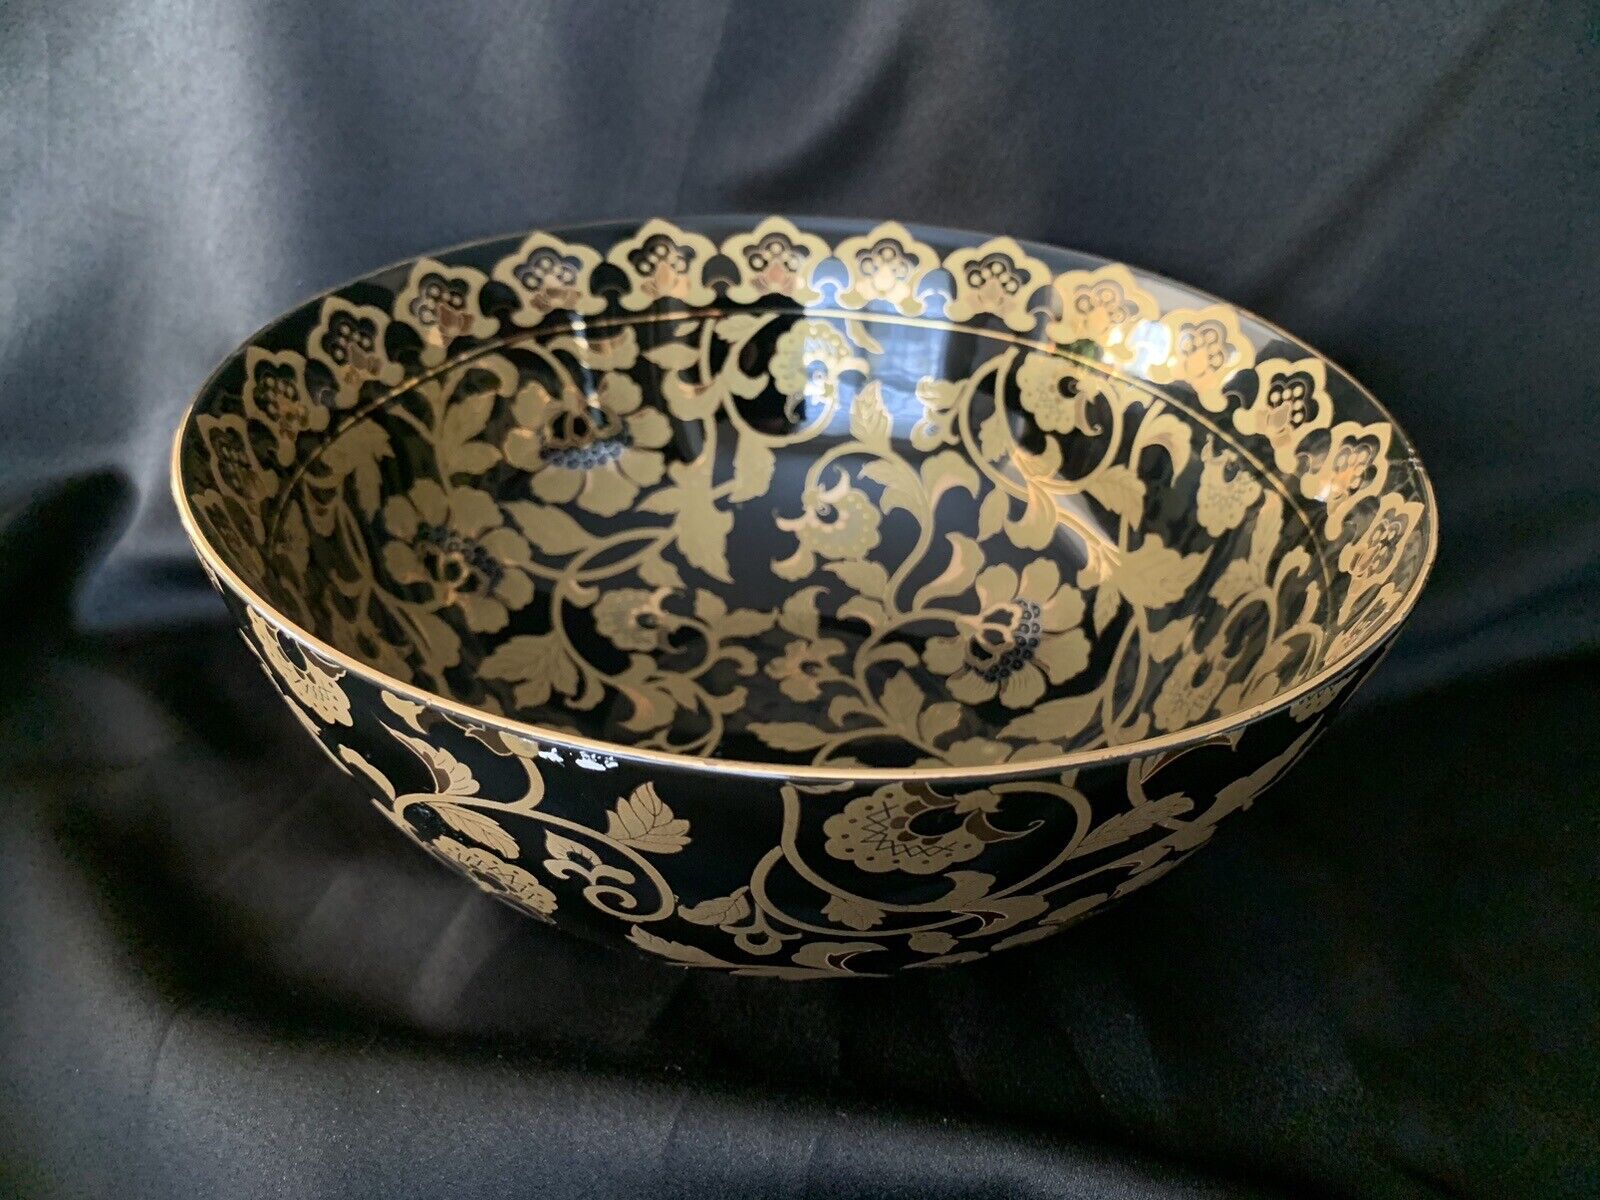 Asian Porcelain Bowl Tapestry Black And Gold Motif Chinese Floral Decorative